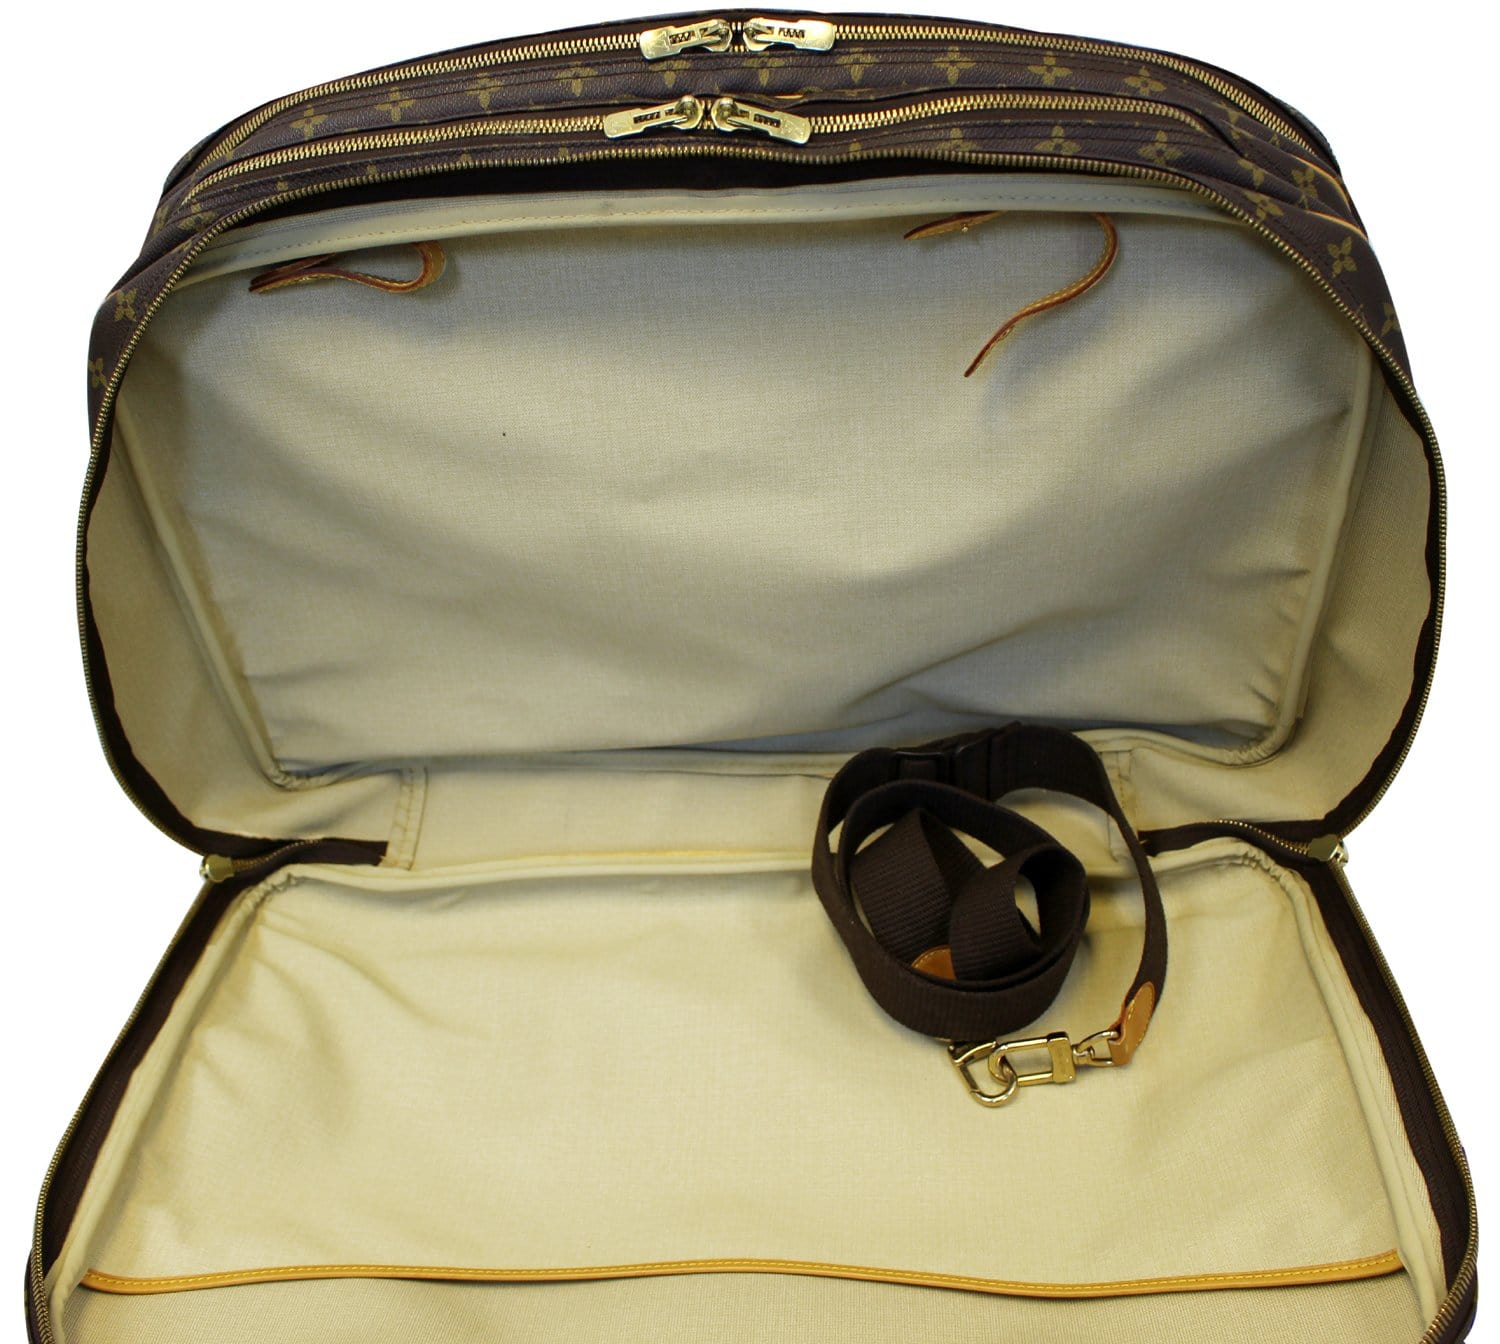 Alize 2 Poches Travel Bag – Lord & Taylor